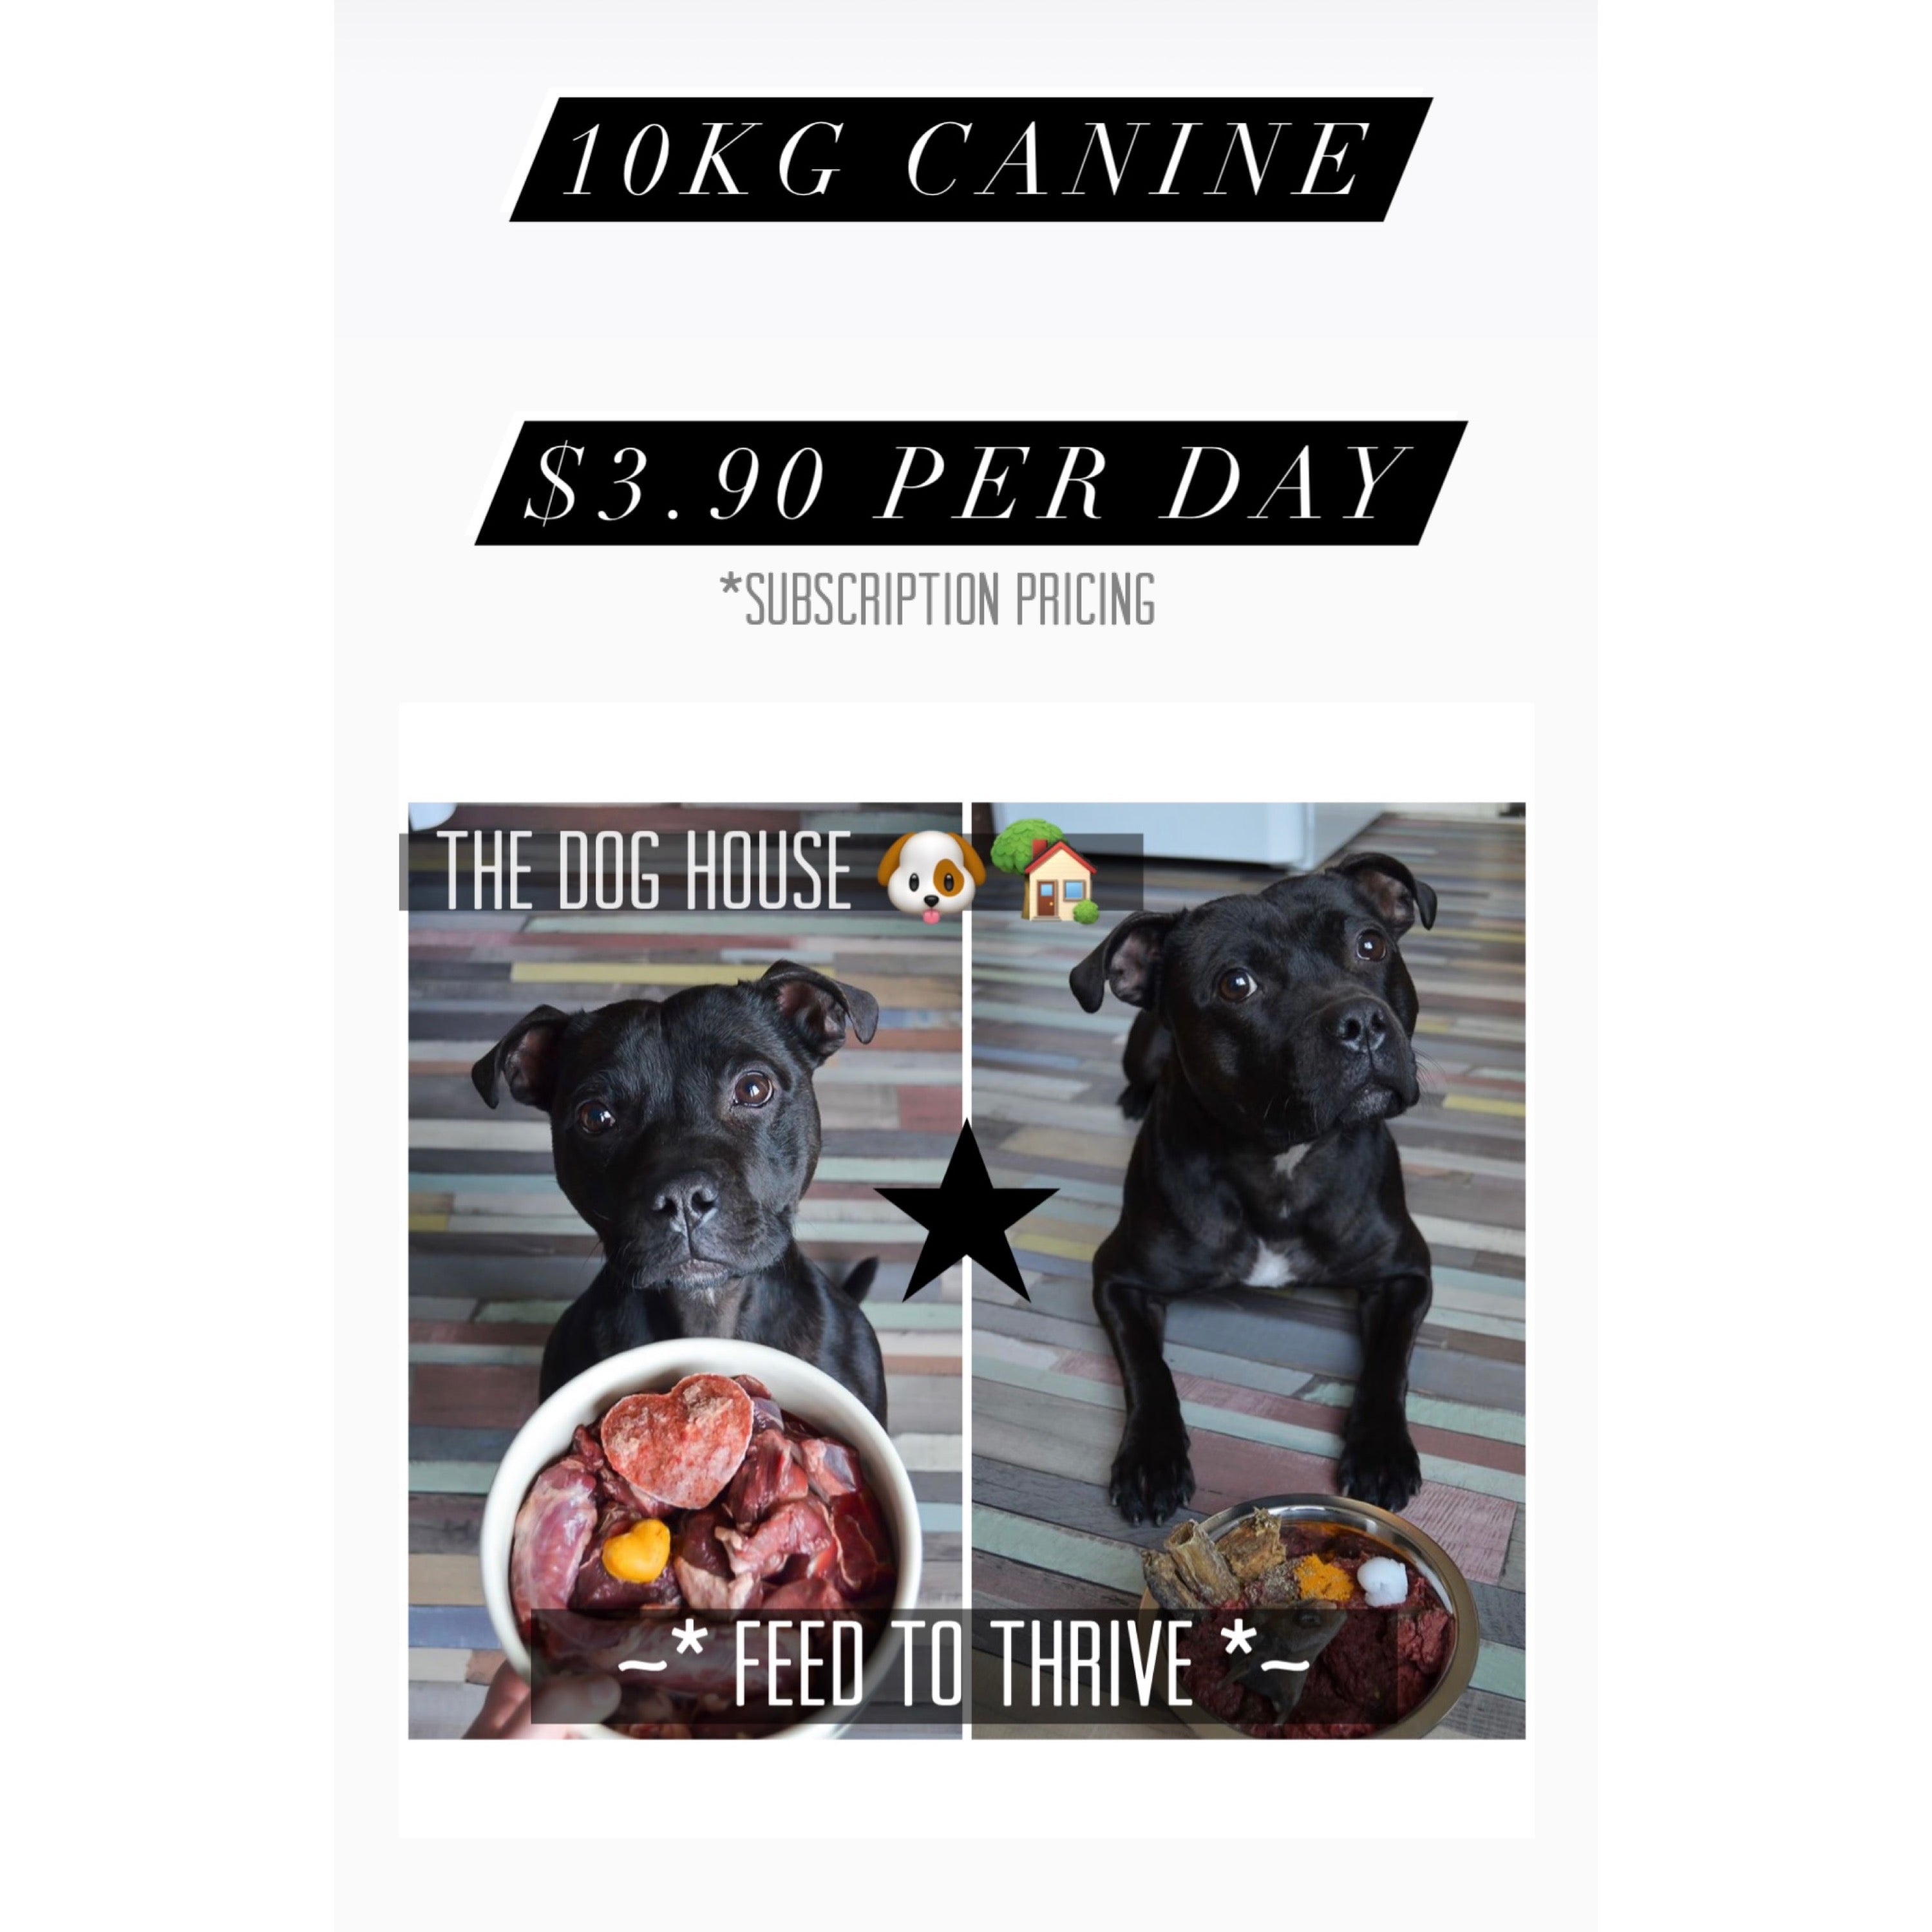 The Dog House Premium Monthly Raw Feeding Package (10kg Canine)